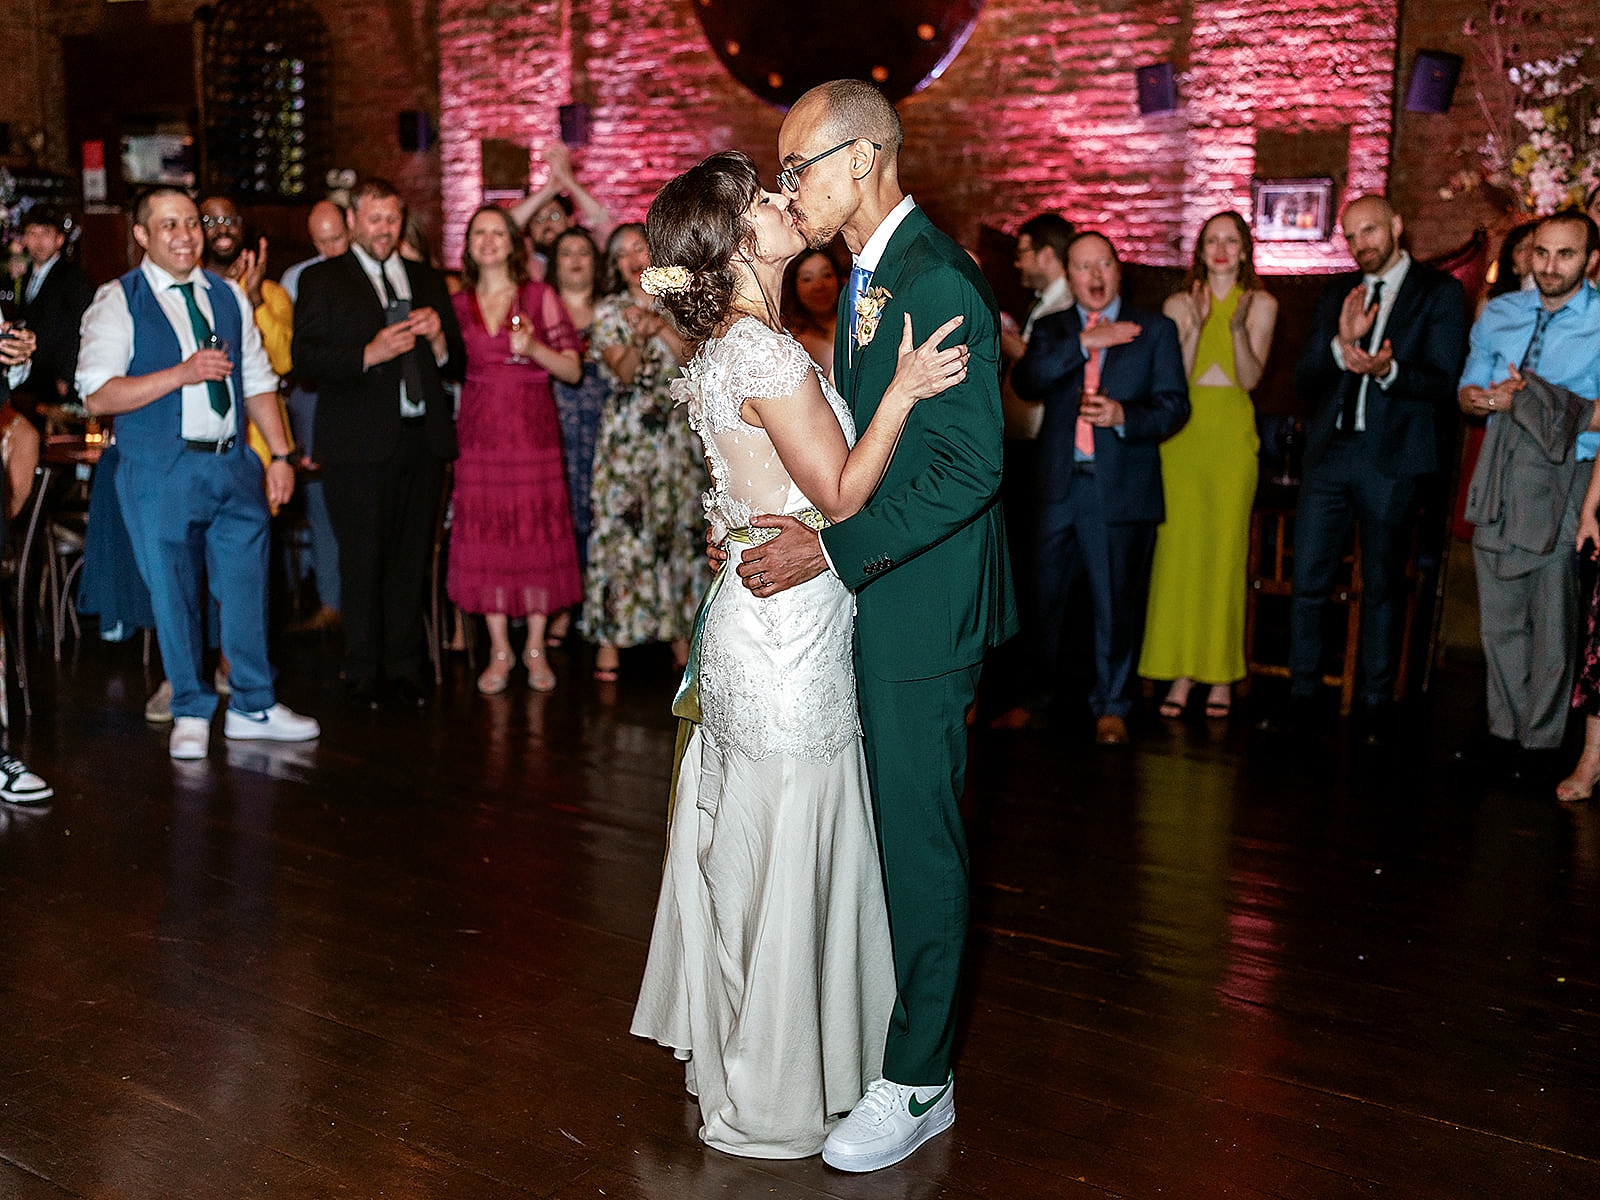 Full shot of the bride and groom sharing a kiss during their first dance.